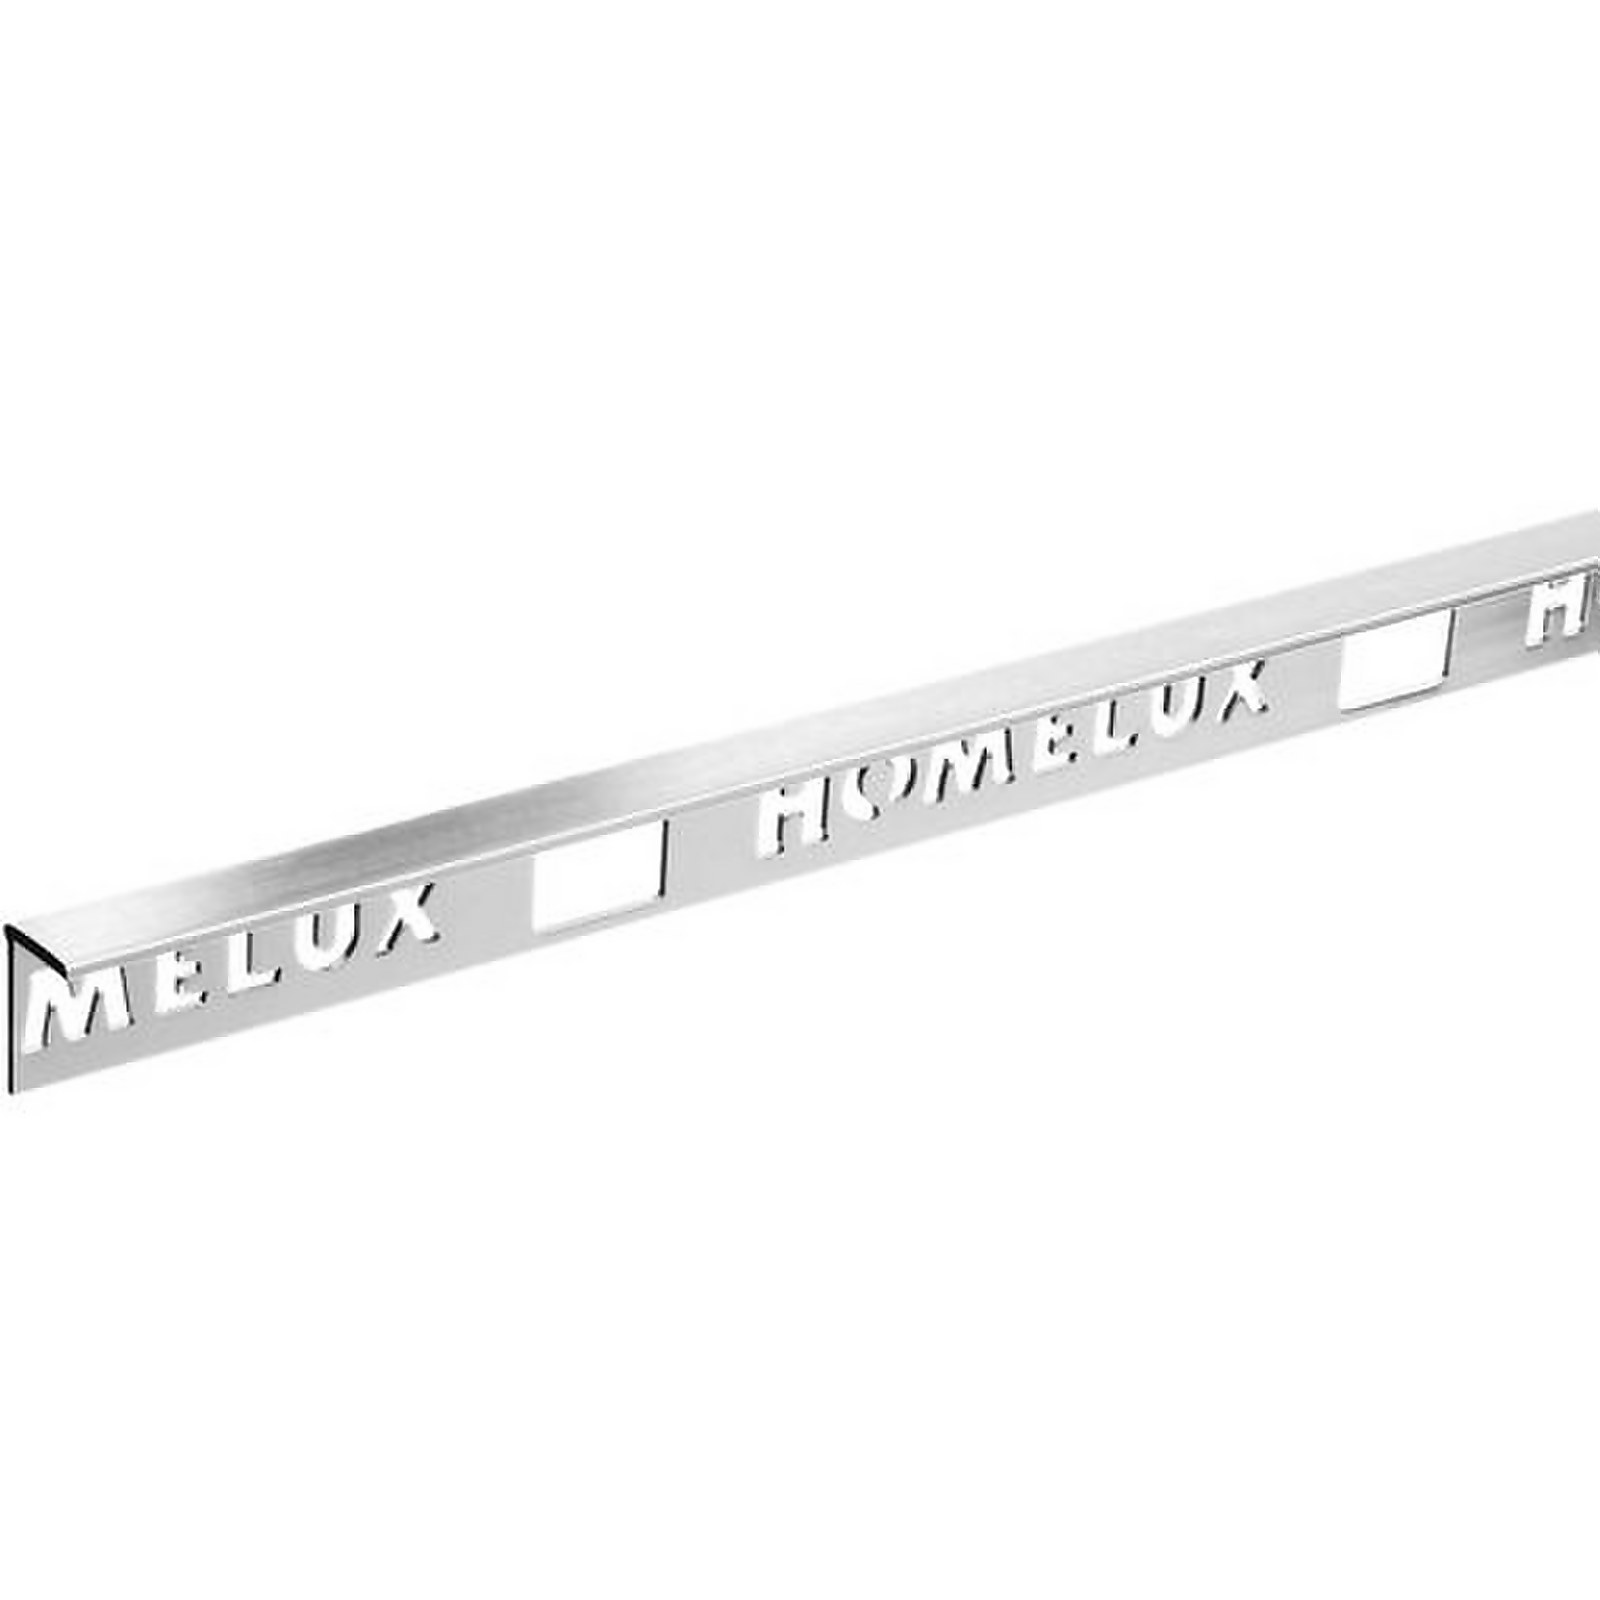 Photo of Homelux 10mm Straight Edge Tile Trim - Stainless Steel Effect - 1.83m